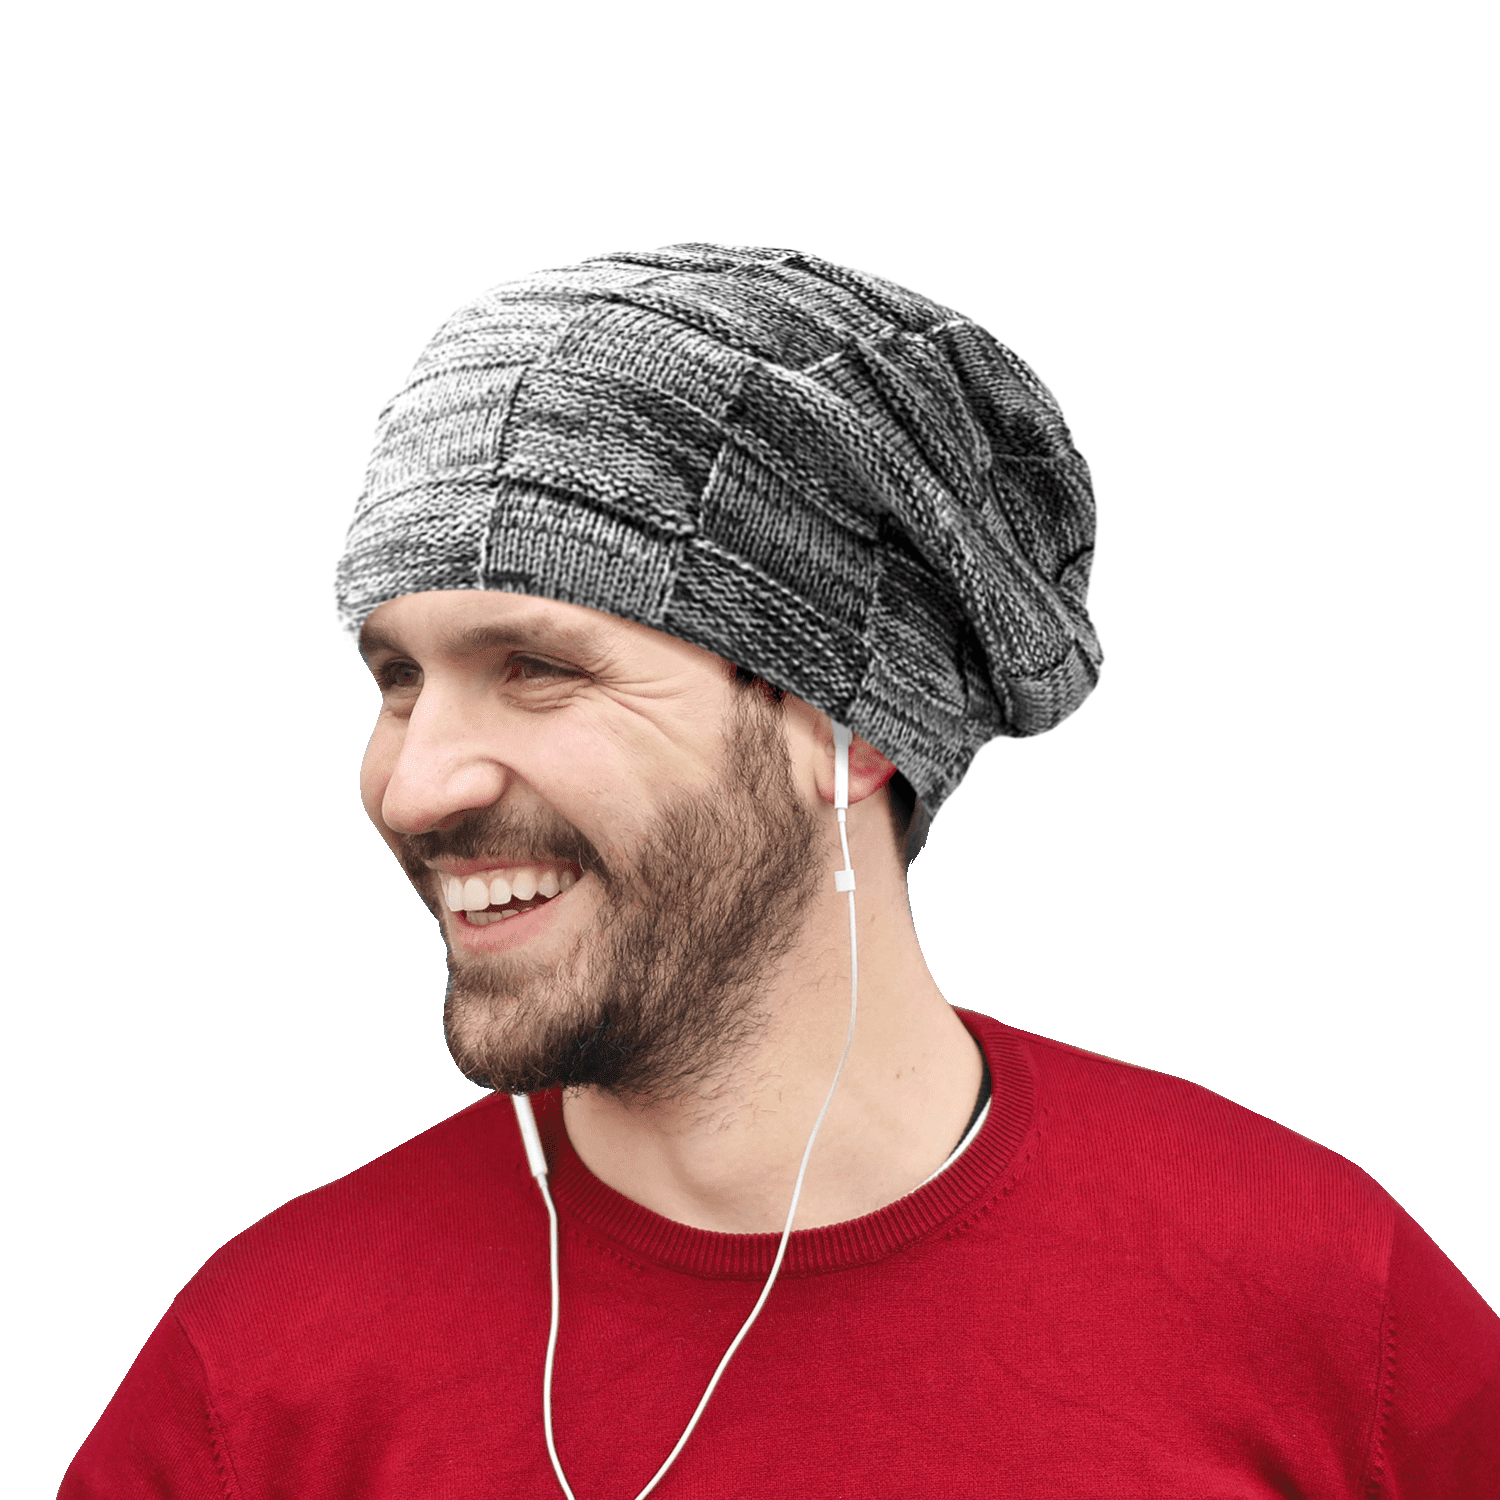 Thalia Slouchy Beanie for Men Winter Hats for Guys Cool Beanies Mens Lined Knit Warm Thick Skully Stocking Benie Hat, One size, Gray, adult unisex